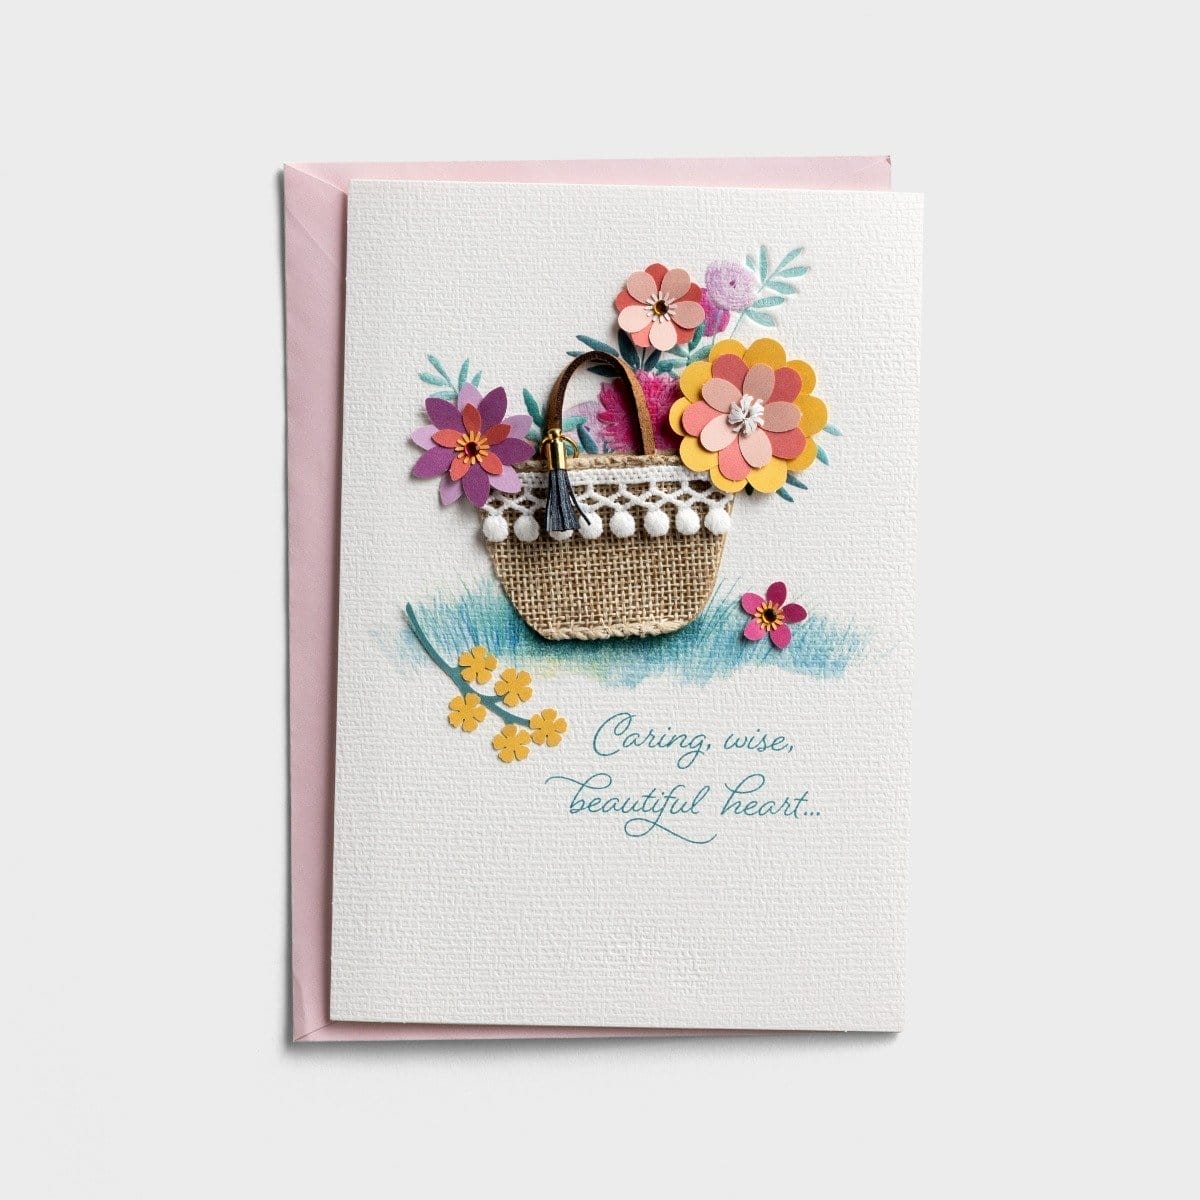 Mother's Day - Caring, Wise, Beautiful Heart - 1 Premium Card